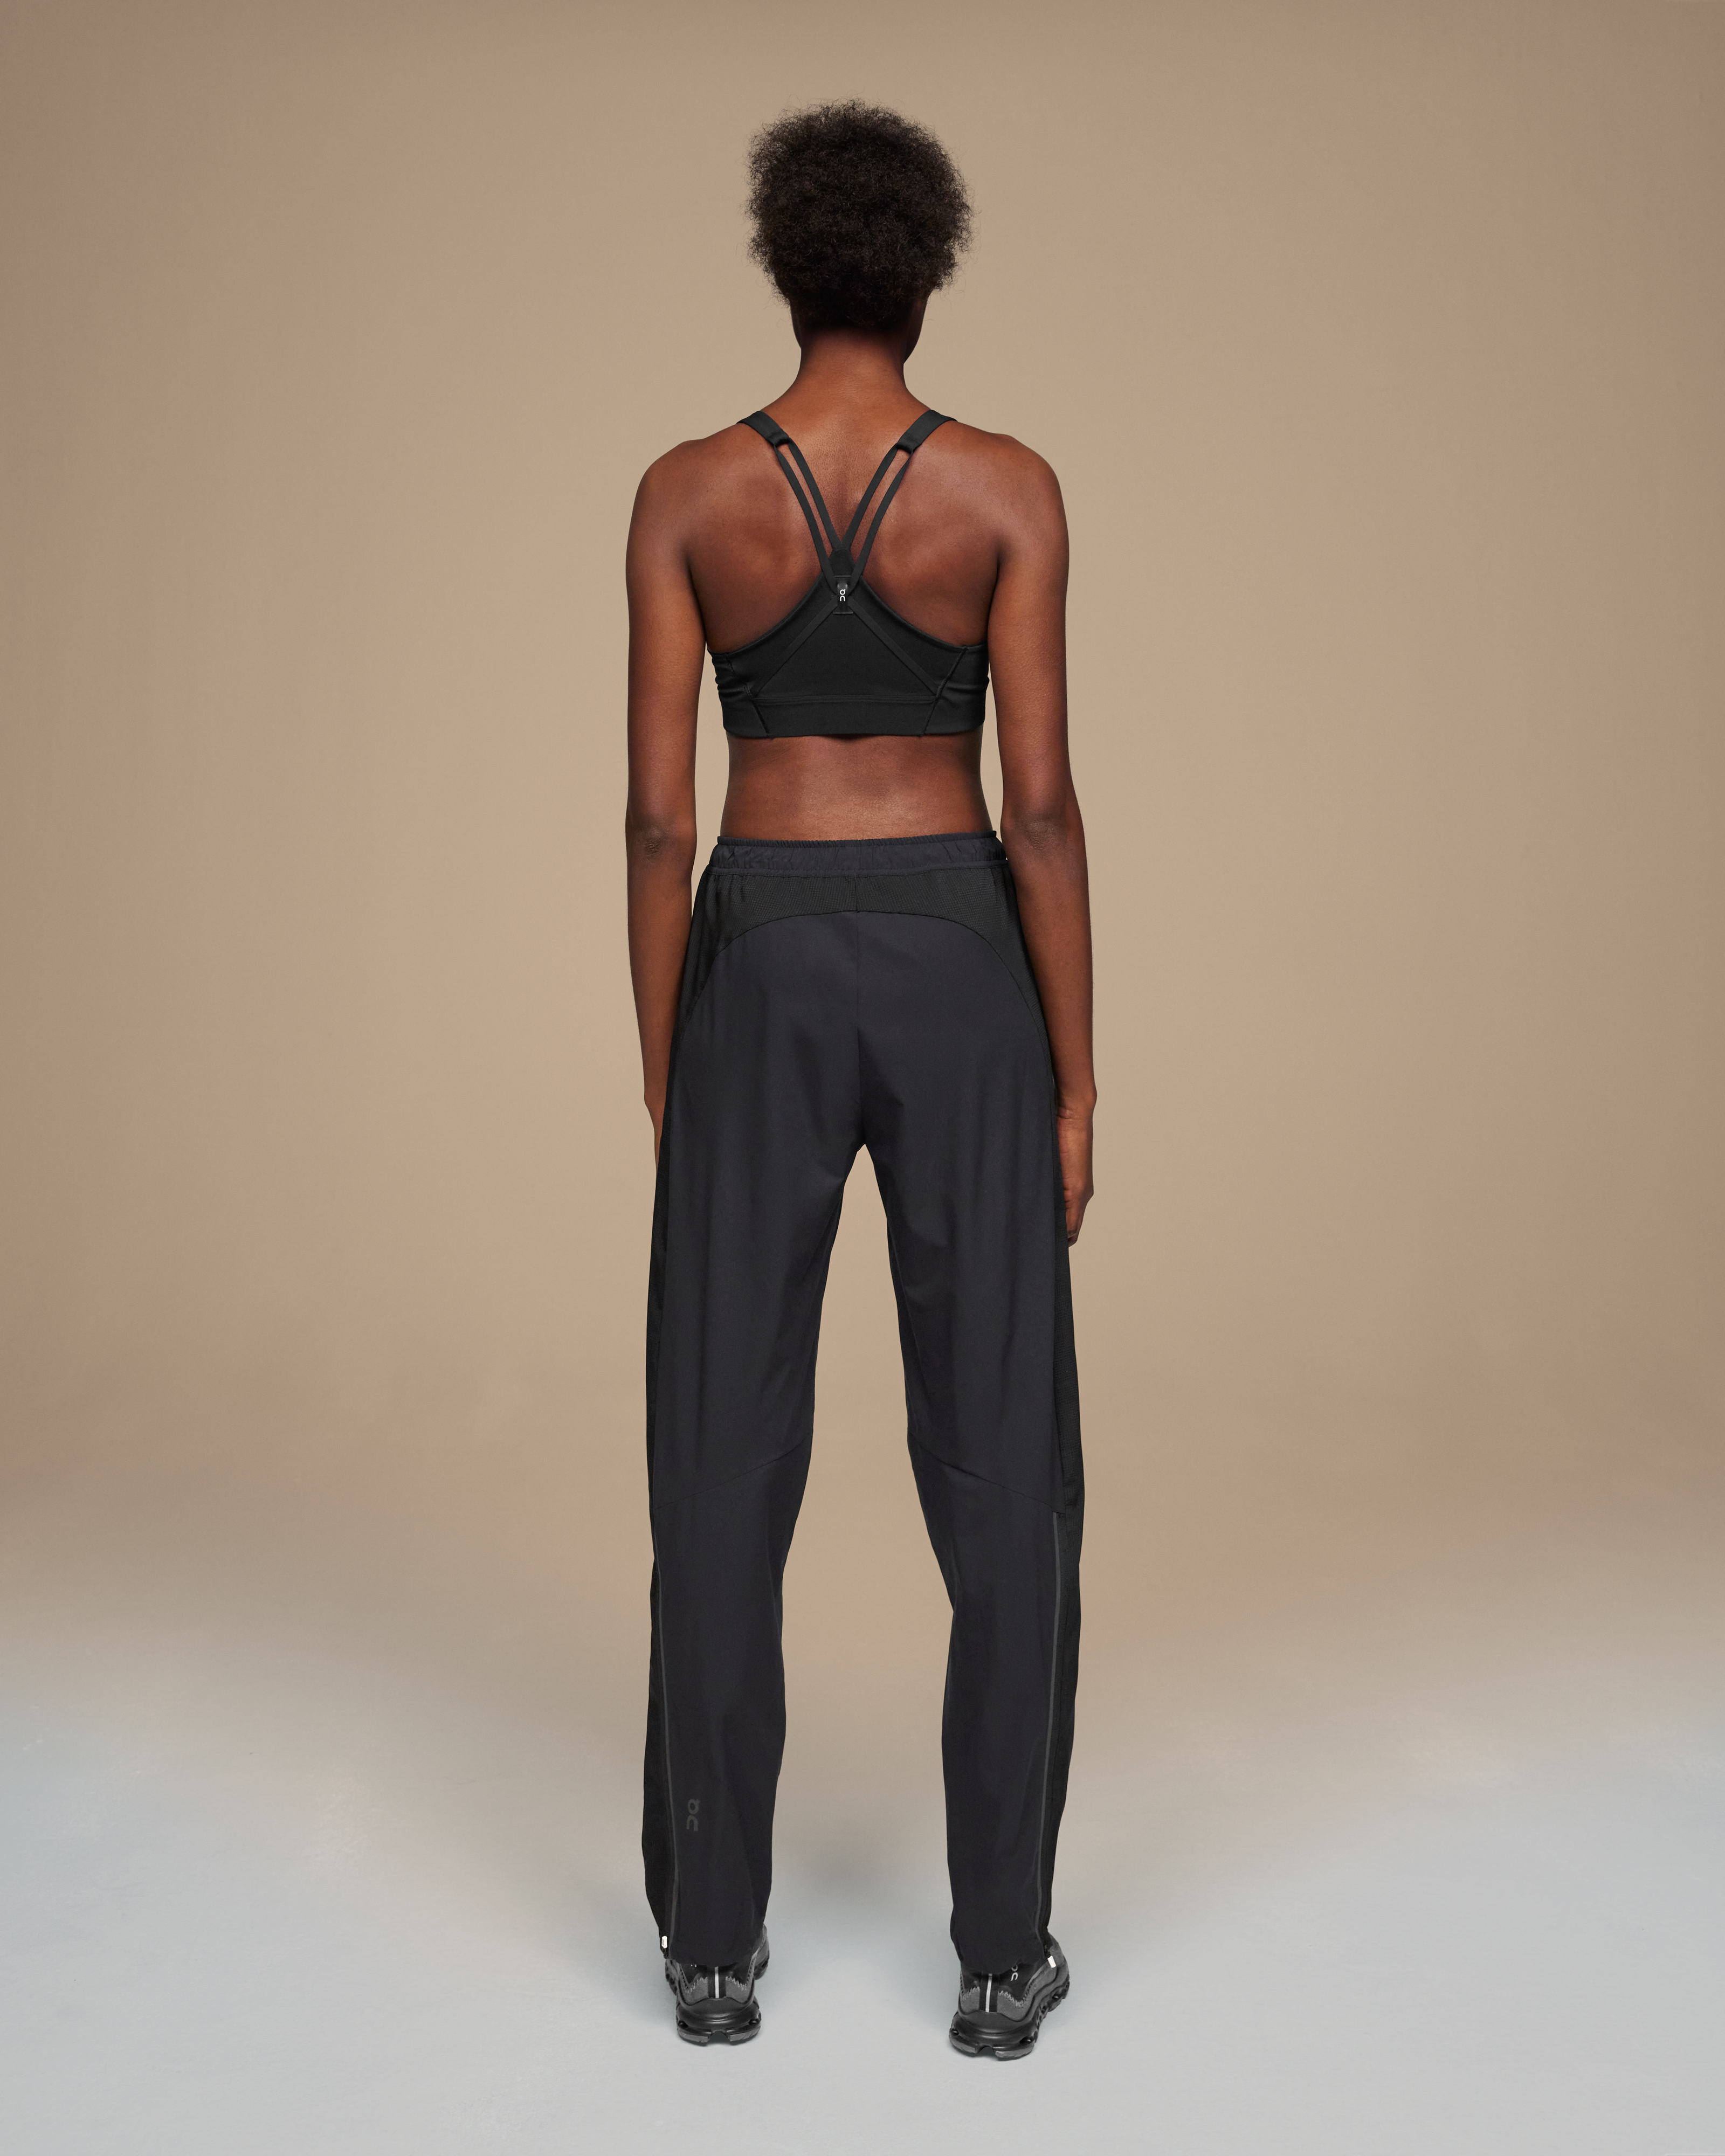 Pre-Owned Lululemon Athletica Womens Size 4 Track India